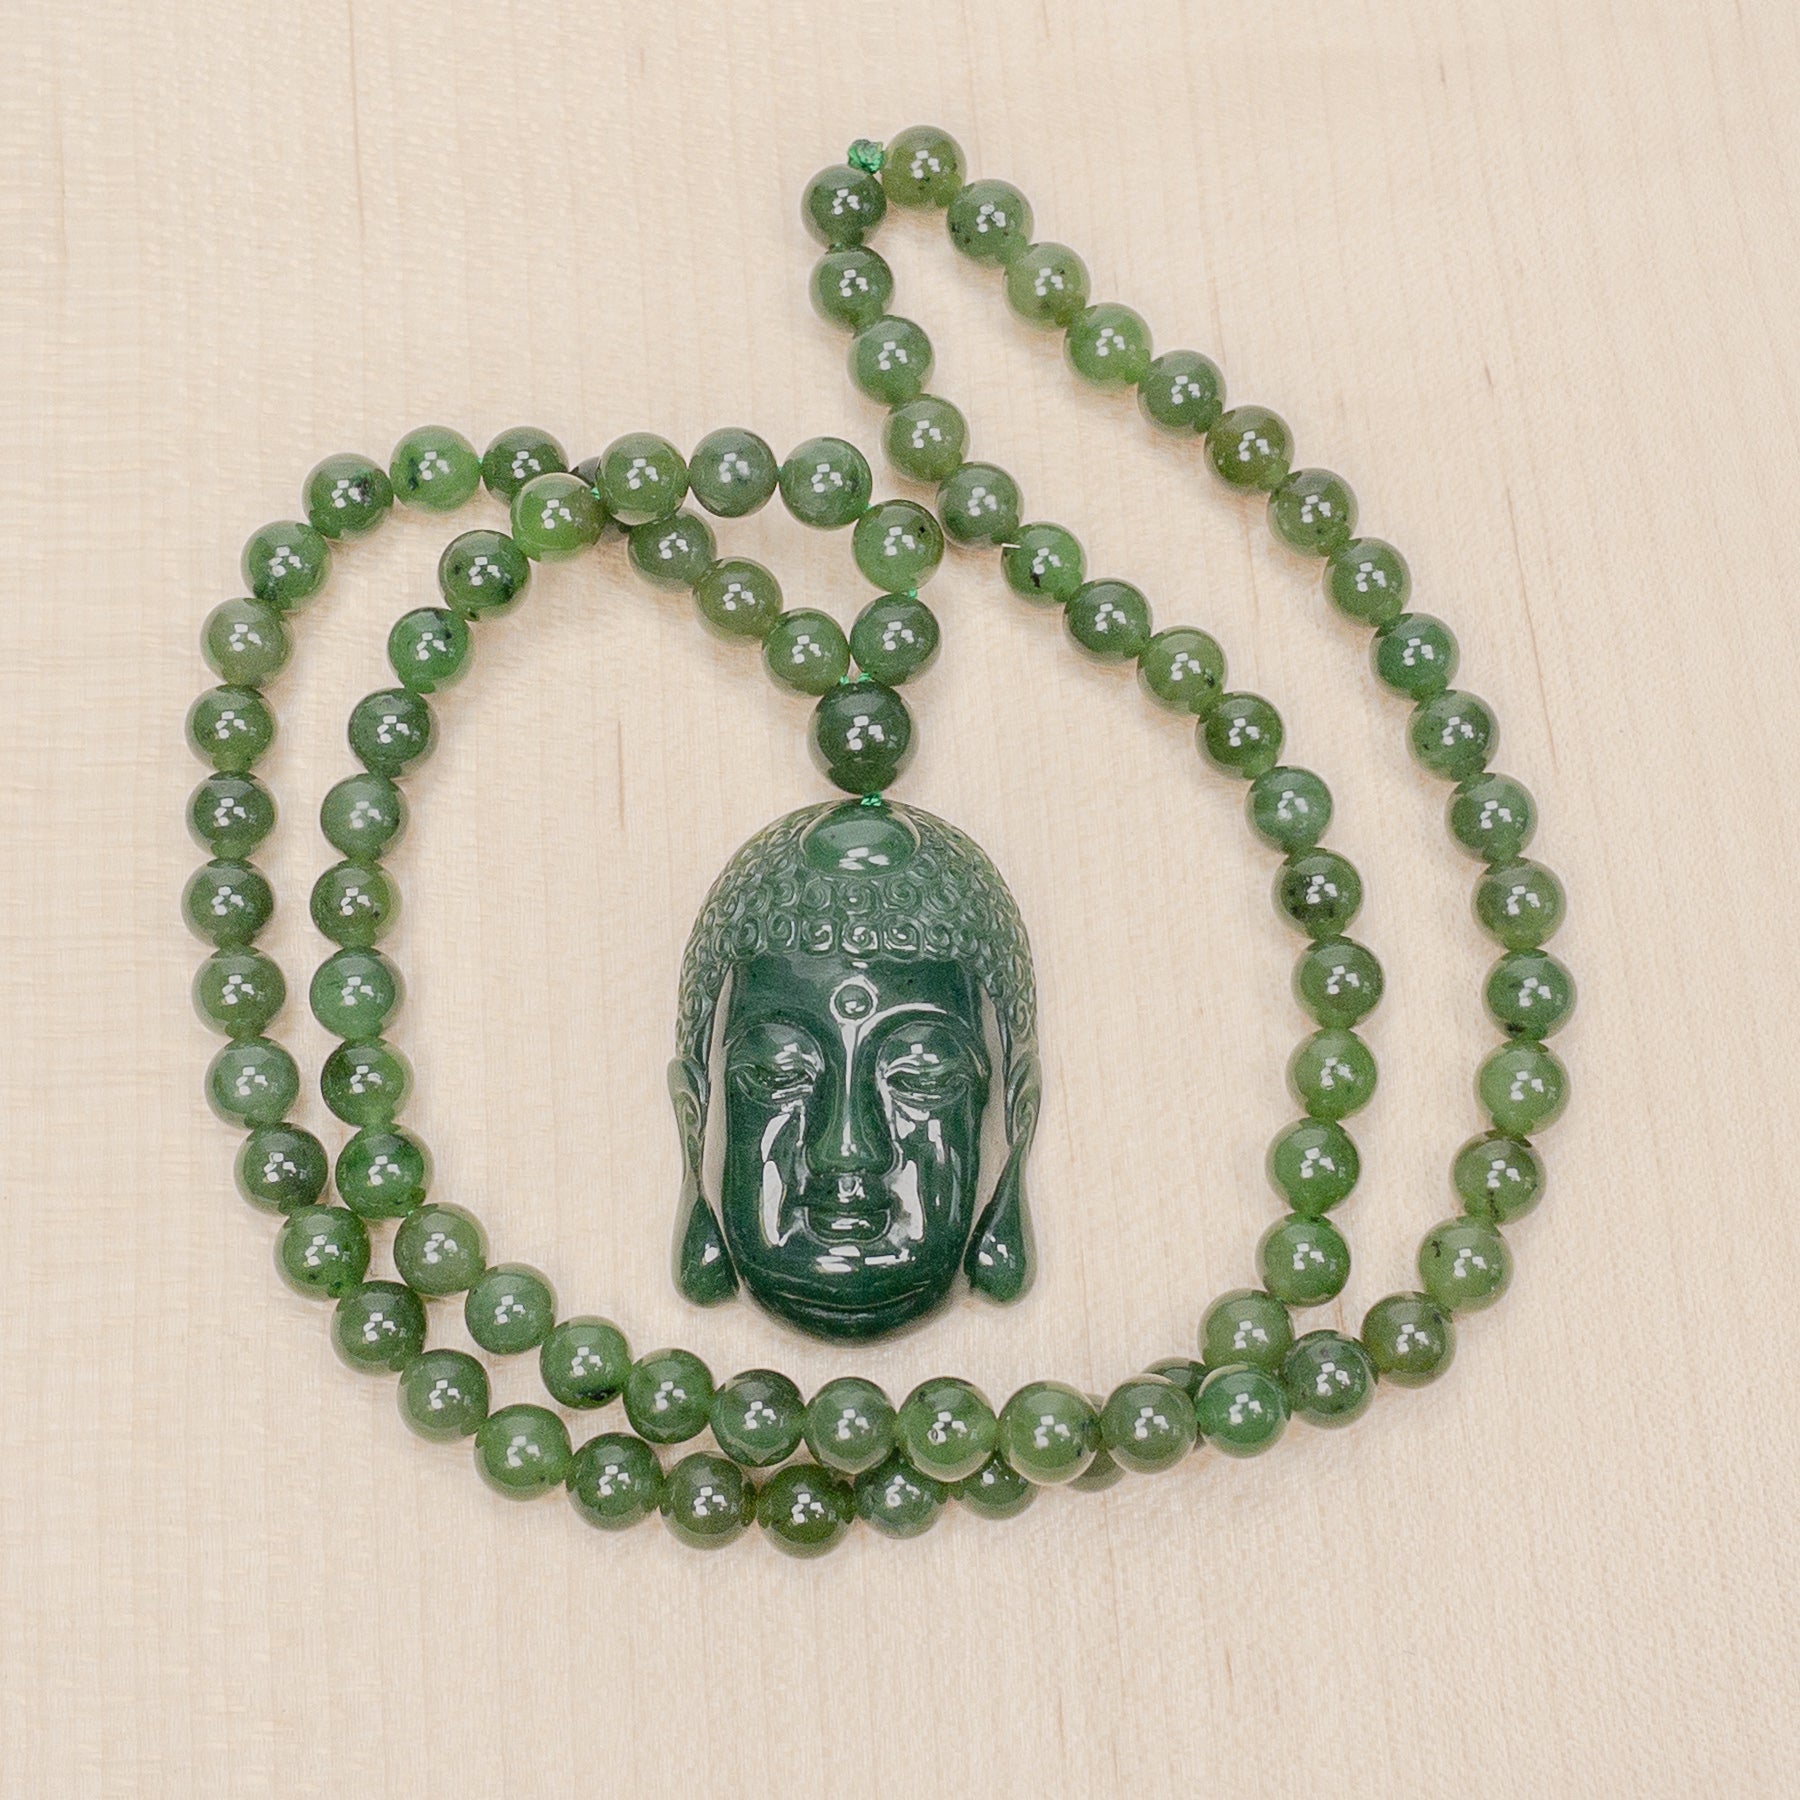 TRANQUILITY: Canadian Jade 8mm Round Bead Claspless Necklace with Buddha Pendant